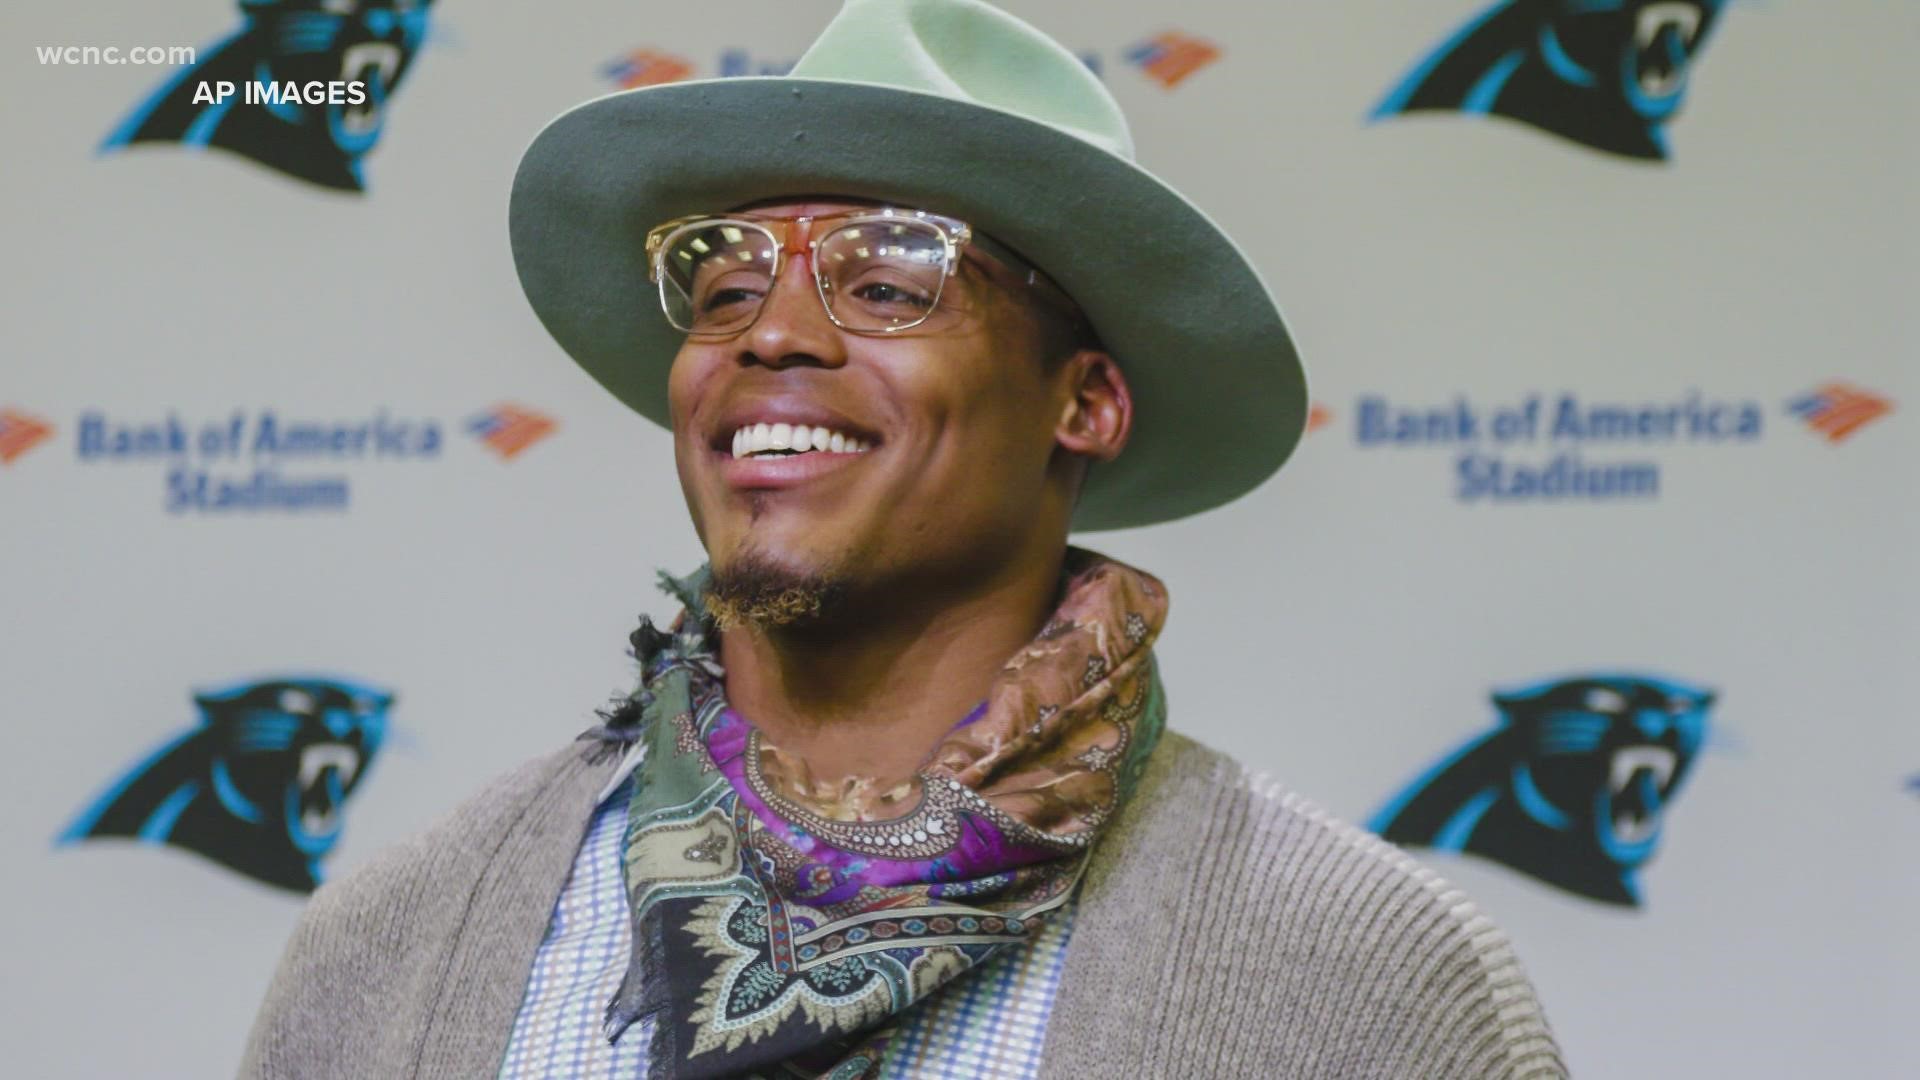 Panthers quarterback Cam Newton is getting special recognition for his contributions in North Carolina. He was nominated for the Order of the Long Leaf Pine.